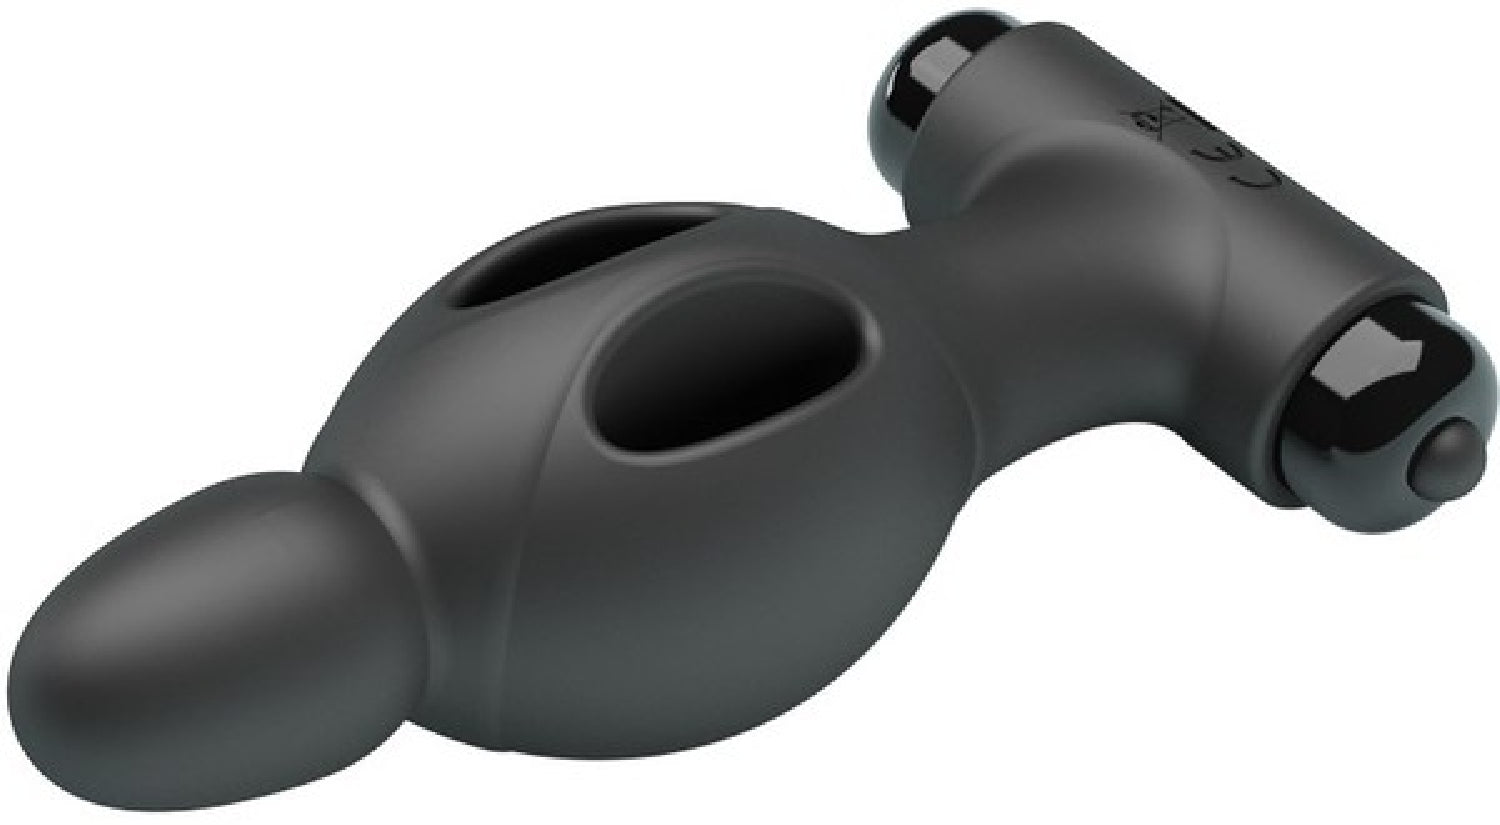 Silicone Vibrating Anal Plug (Black) - One Stop Adult Shop